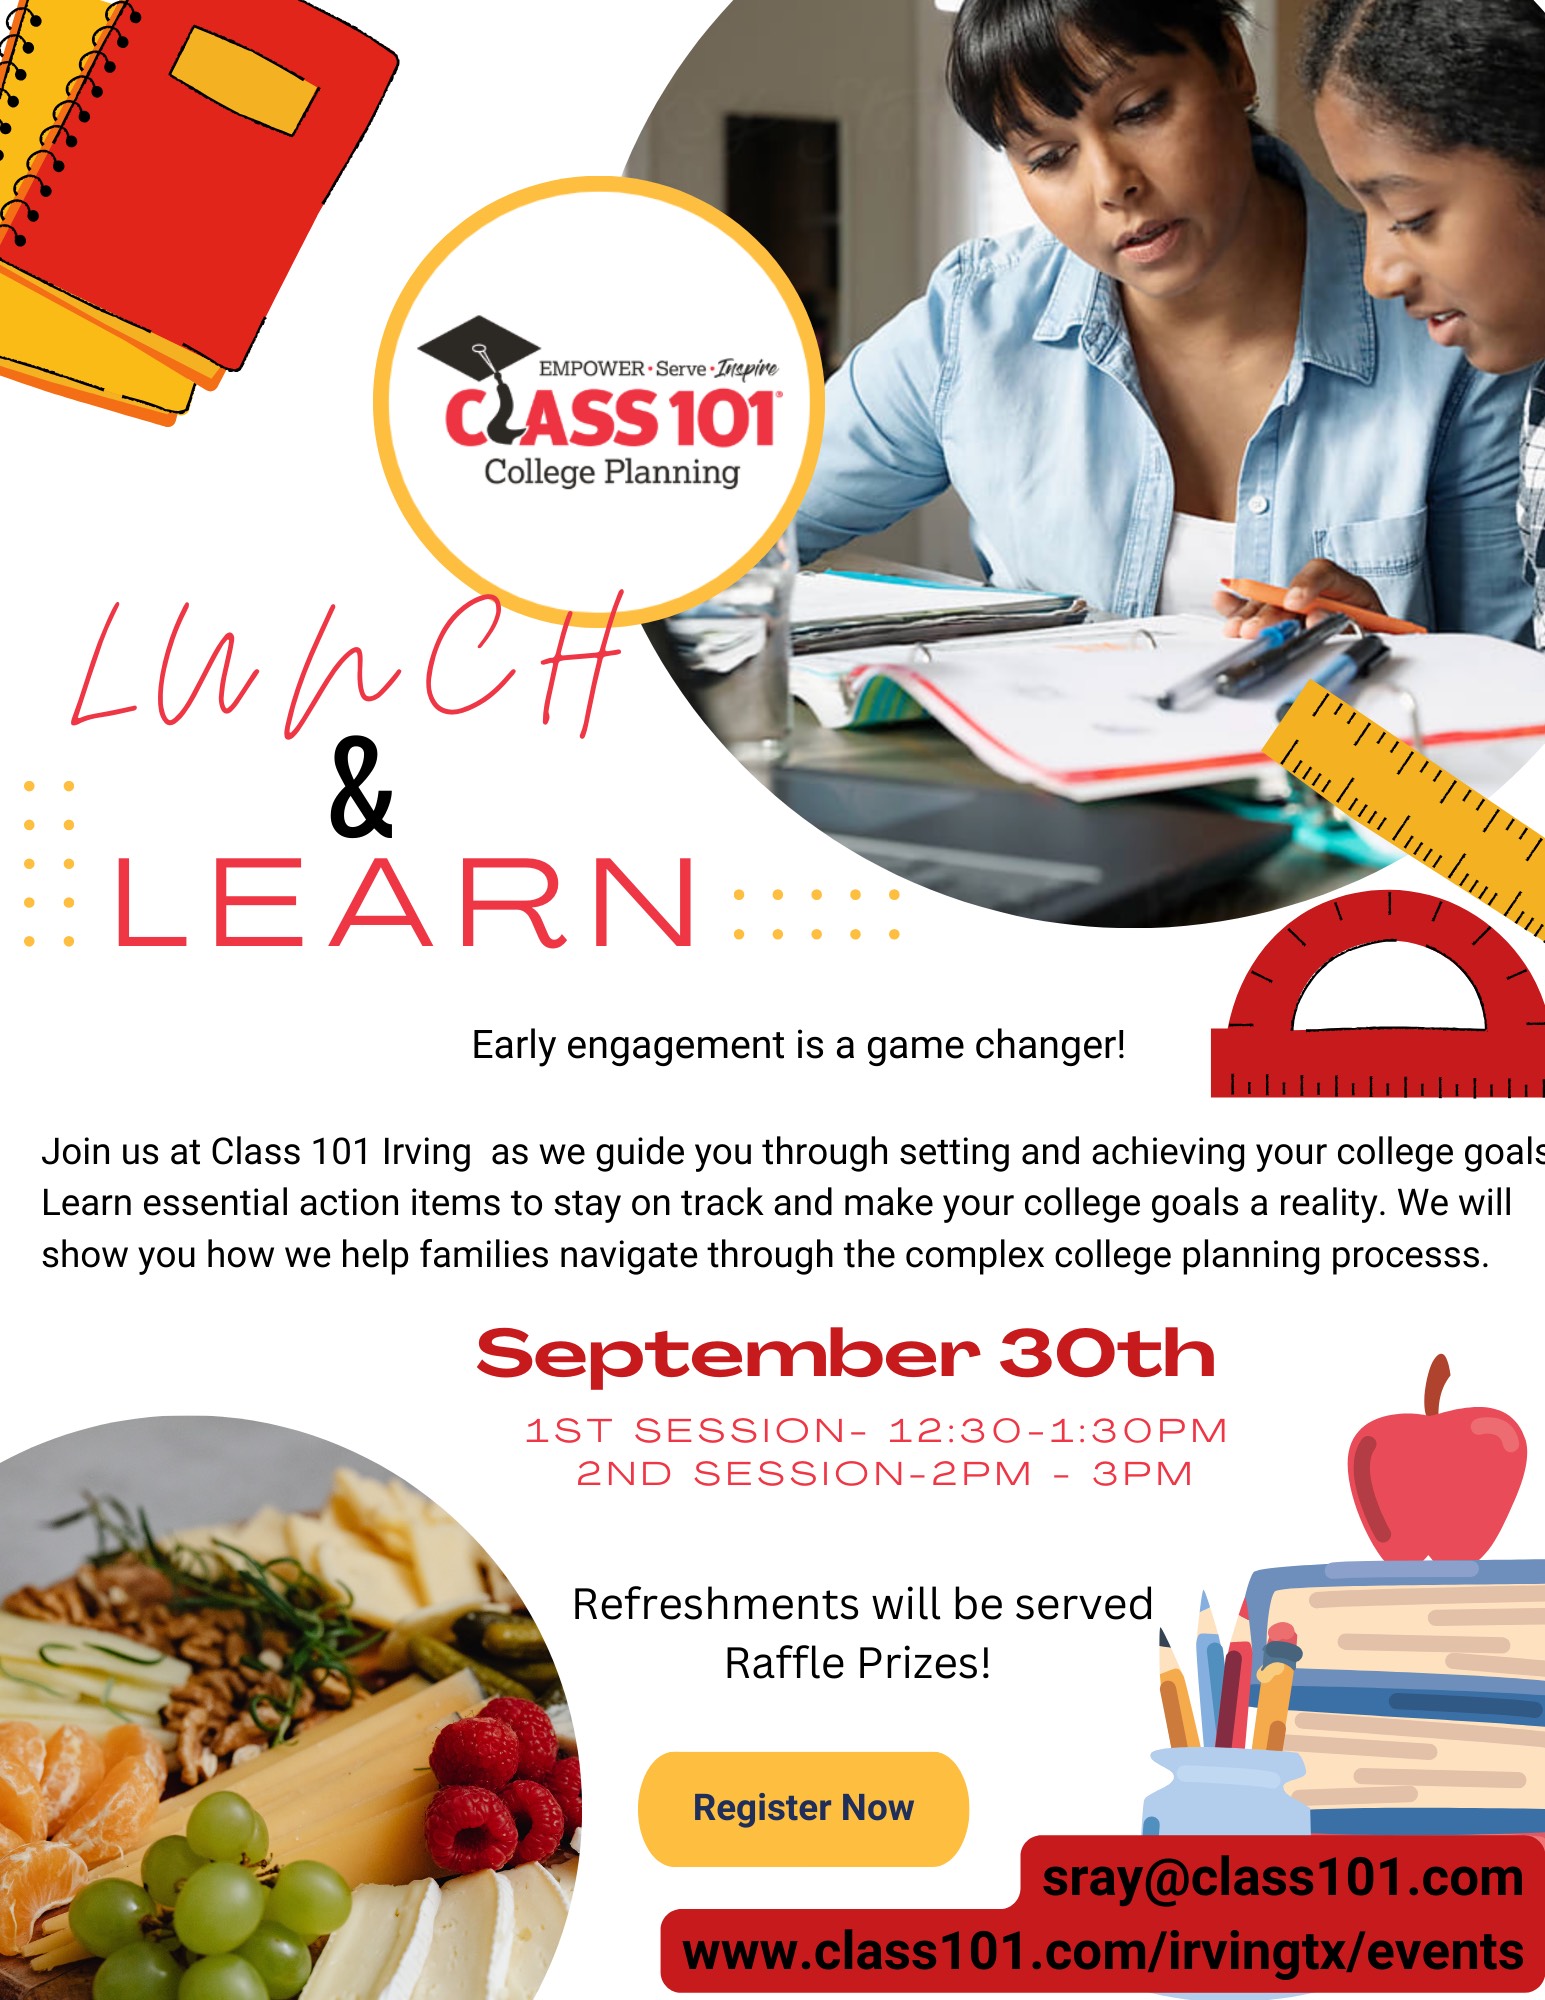 Back to School Lunch and Learn Presentation